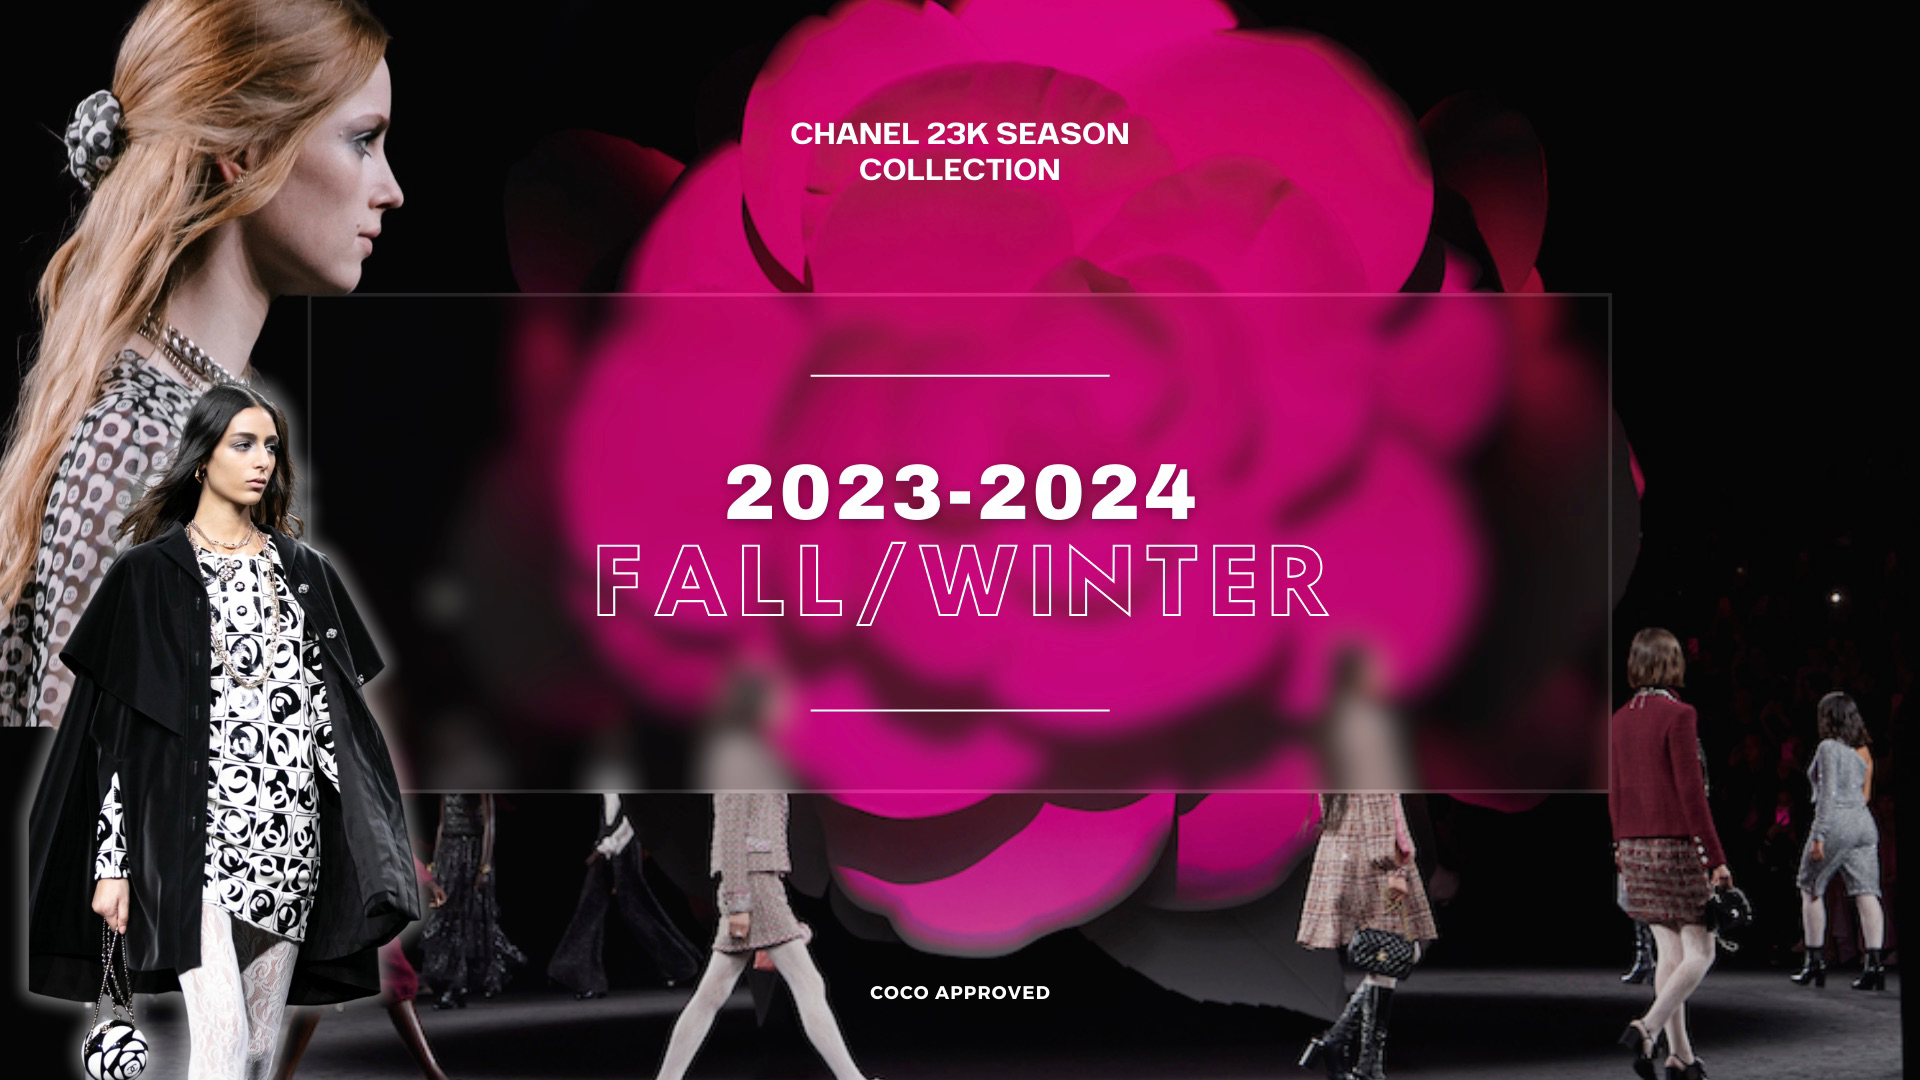 CHANEL 23K PREVIEW (Part 1) RELEASE IN SEPTEMBER 